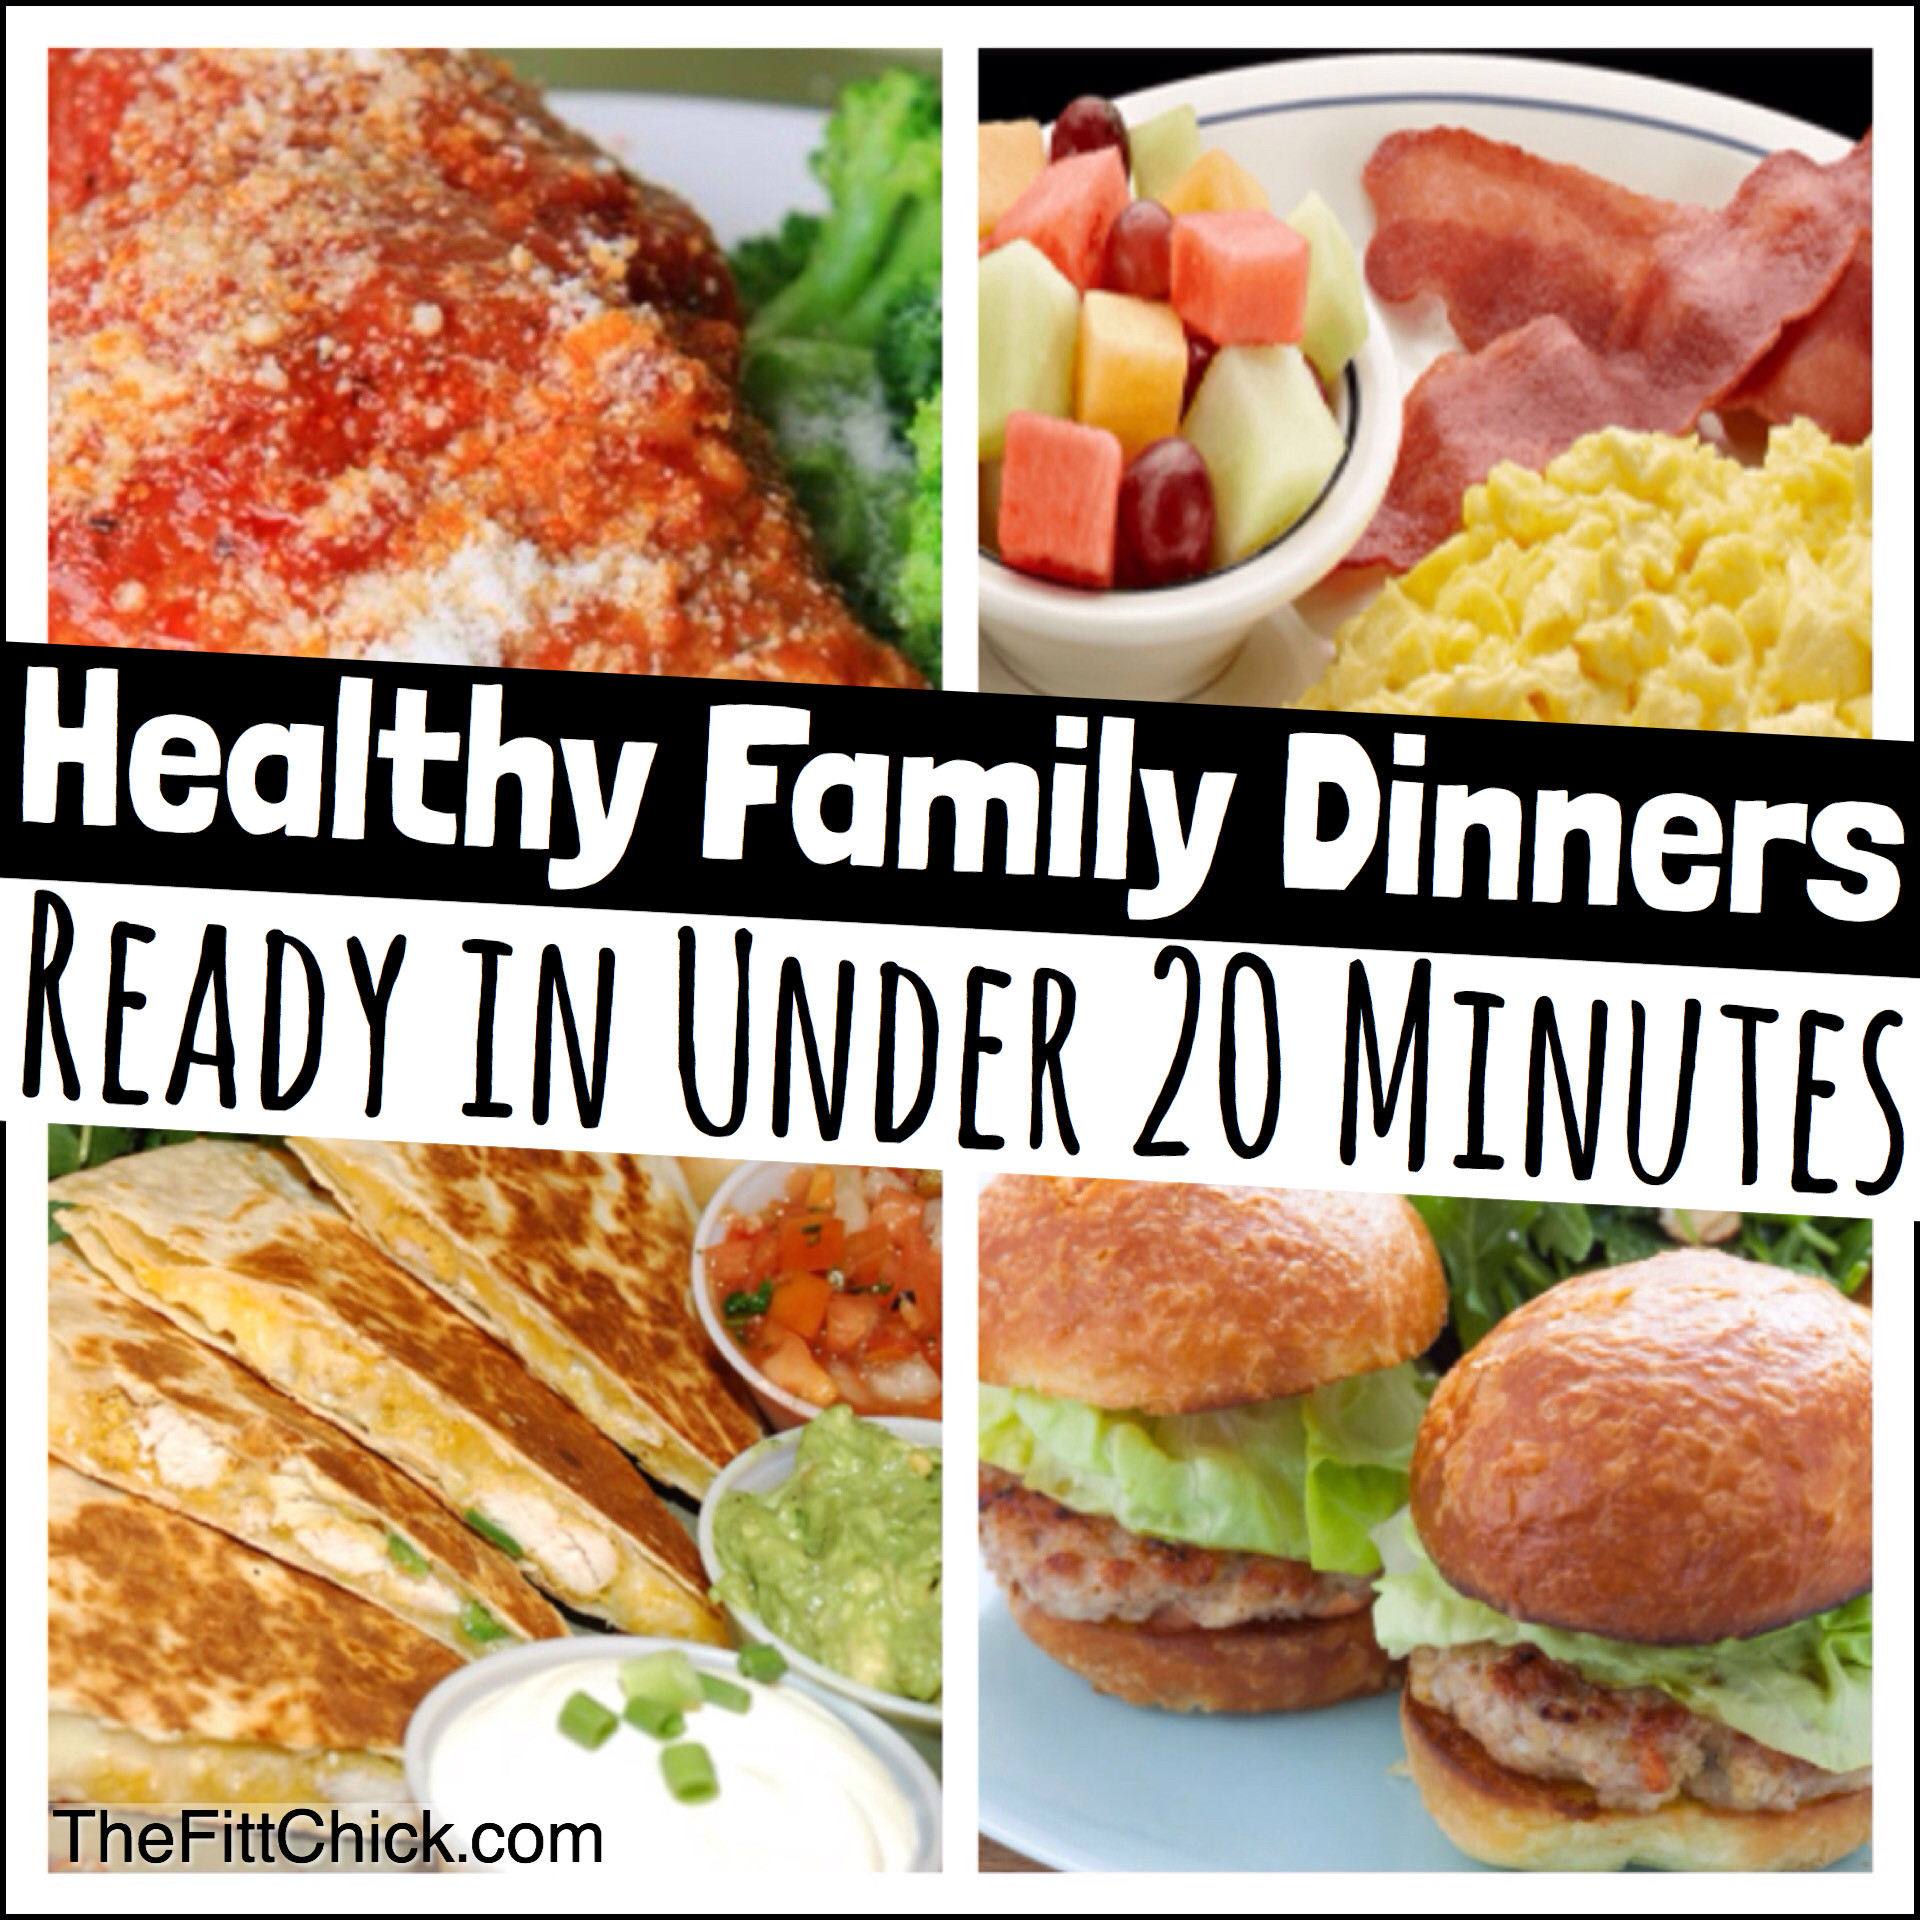 Healthy Dinner Ideas For Family
 Healthy Family dinners in under 20 minutes